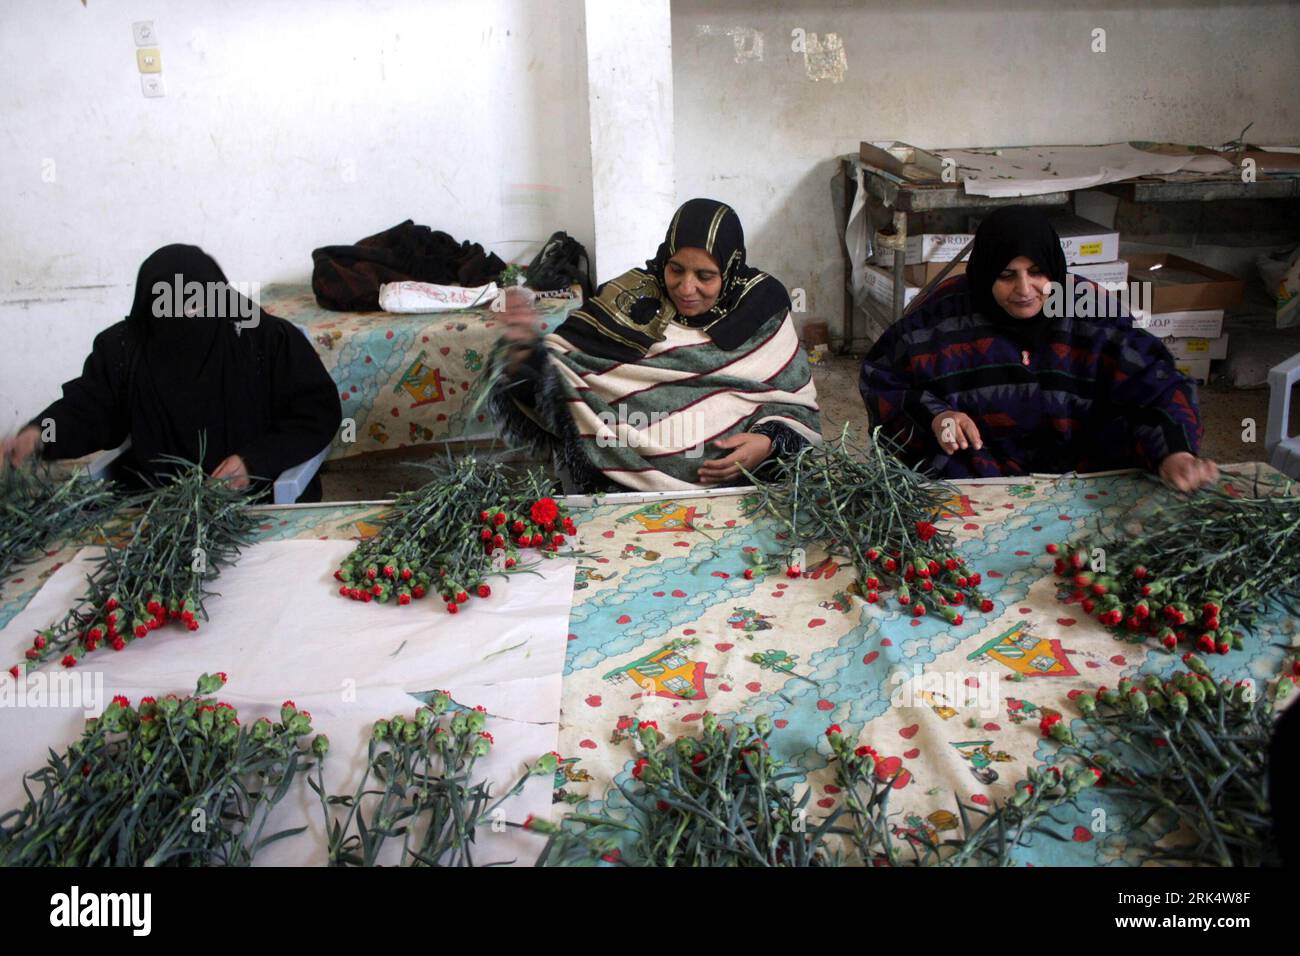 Bildnummer: 53672961  Datum: 16.12.2009  Copyright: imago/Xinhua (091216) -- GAZA, Dec. 16, 2009 (Xinhua) -- Palestinians select flowers at a farm after Israel granted approval for the export of Palestinian flowers from the Gaza Strip to the European market in Rafah, southern Gaza Strip, Dec. 16, 2009. Farmers in the strip enter their third year of export restrictions which were imposed by Israel after the Hamas took control of the strip. (Xinhua/Khaled Omar) (zhs) (3)GAZA-FLOWERS-ISRAEL PUBLICATIONxNOTxINxCHN Blumen Zucht Blumenzucht Nelkenzucht Nelken Export kbdig xub 2009 quer o0 Wirtschaft Stock Photo